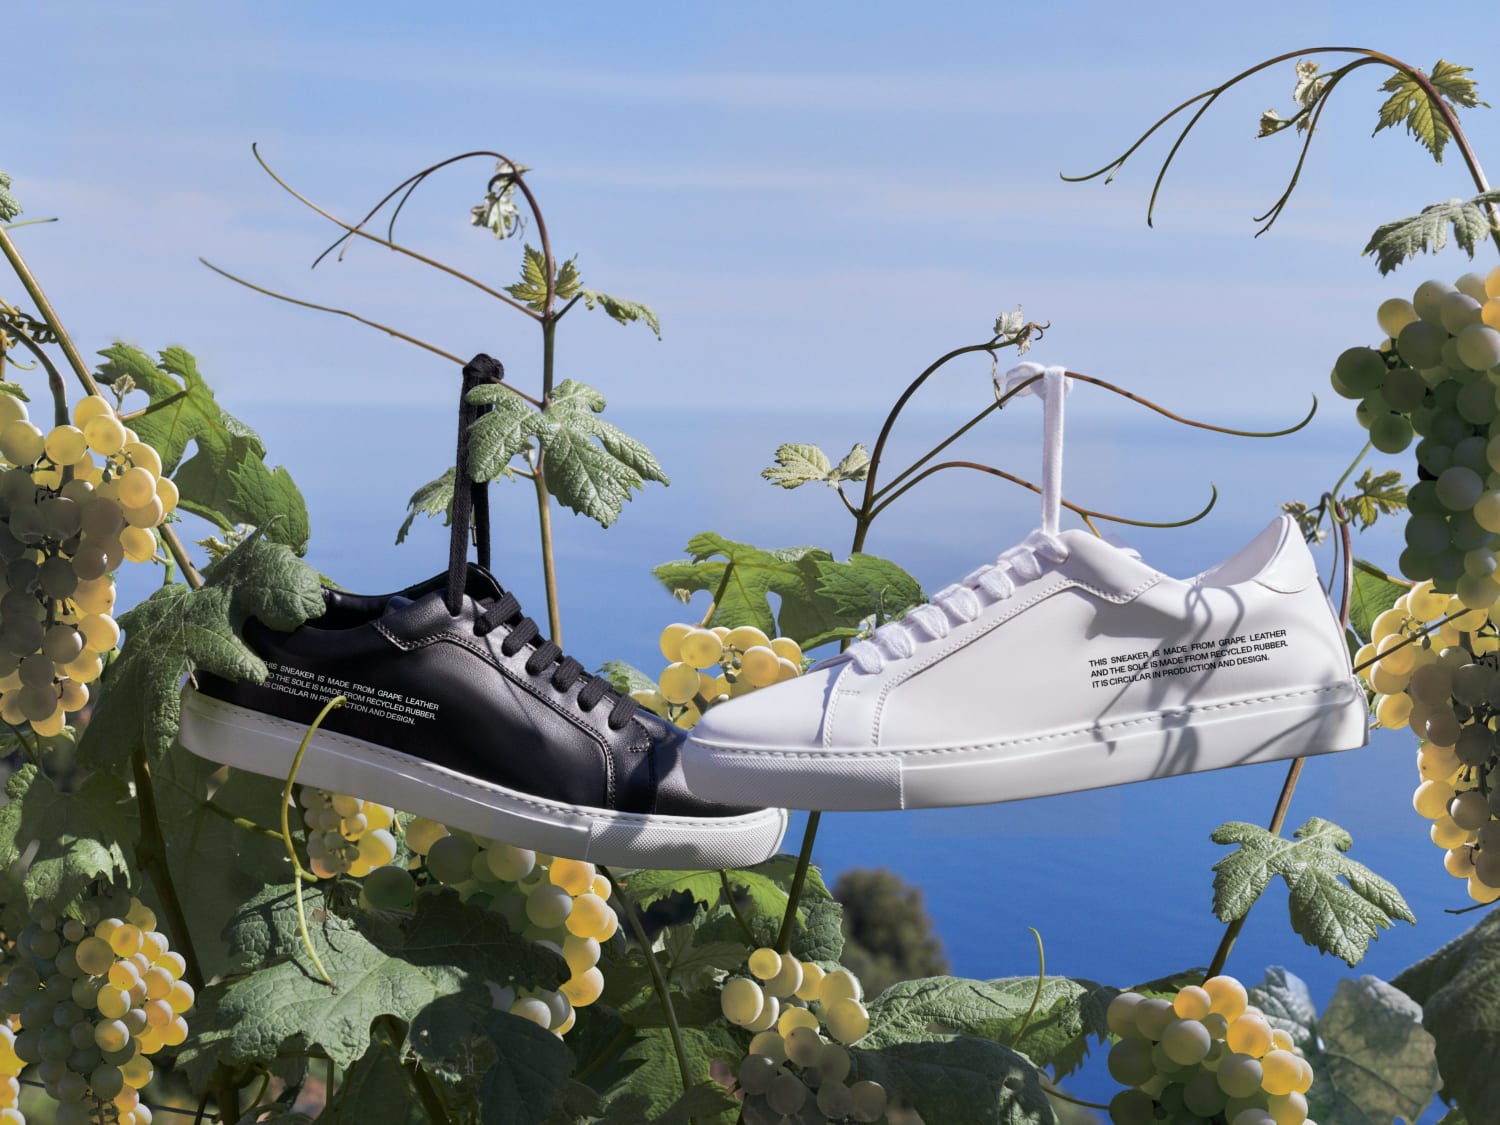 Pangaia Just Launched Sustainable, Eco-Friendly Sneakers Made of Grape Leather